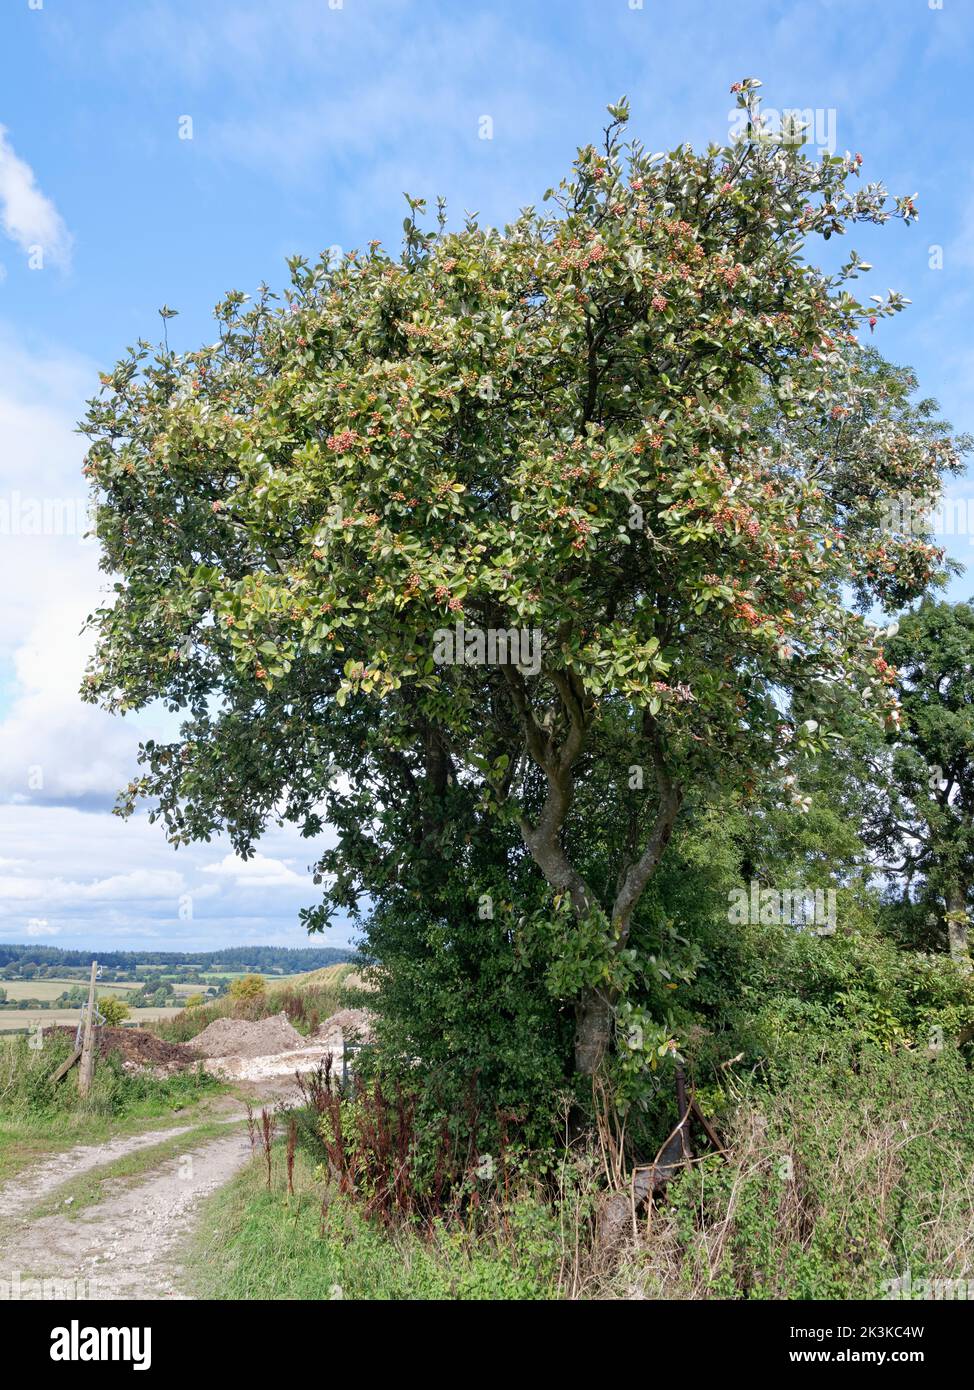 Common Whitebeam (Sorbus aria) tree with red berries ripening beside a farm track, Wiltshire Downs, UK, September. Stock Photo